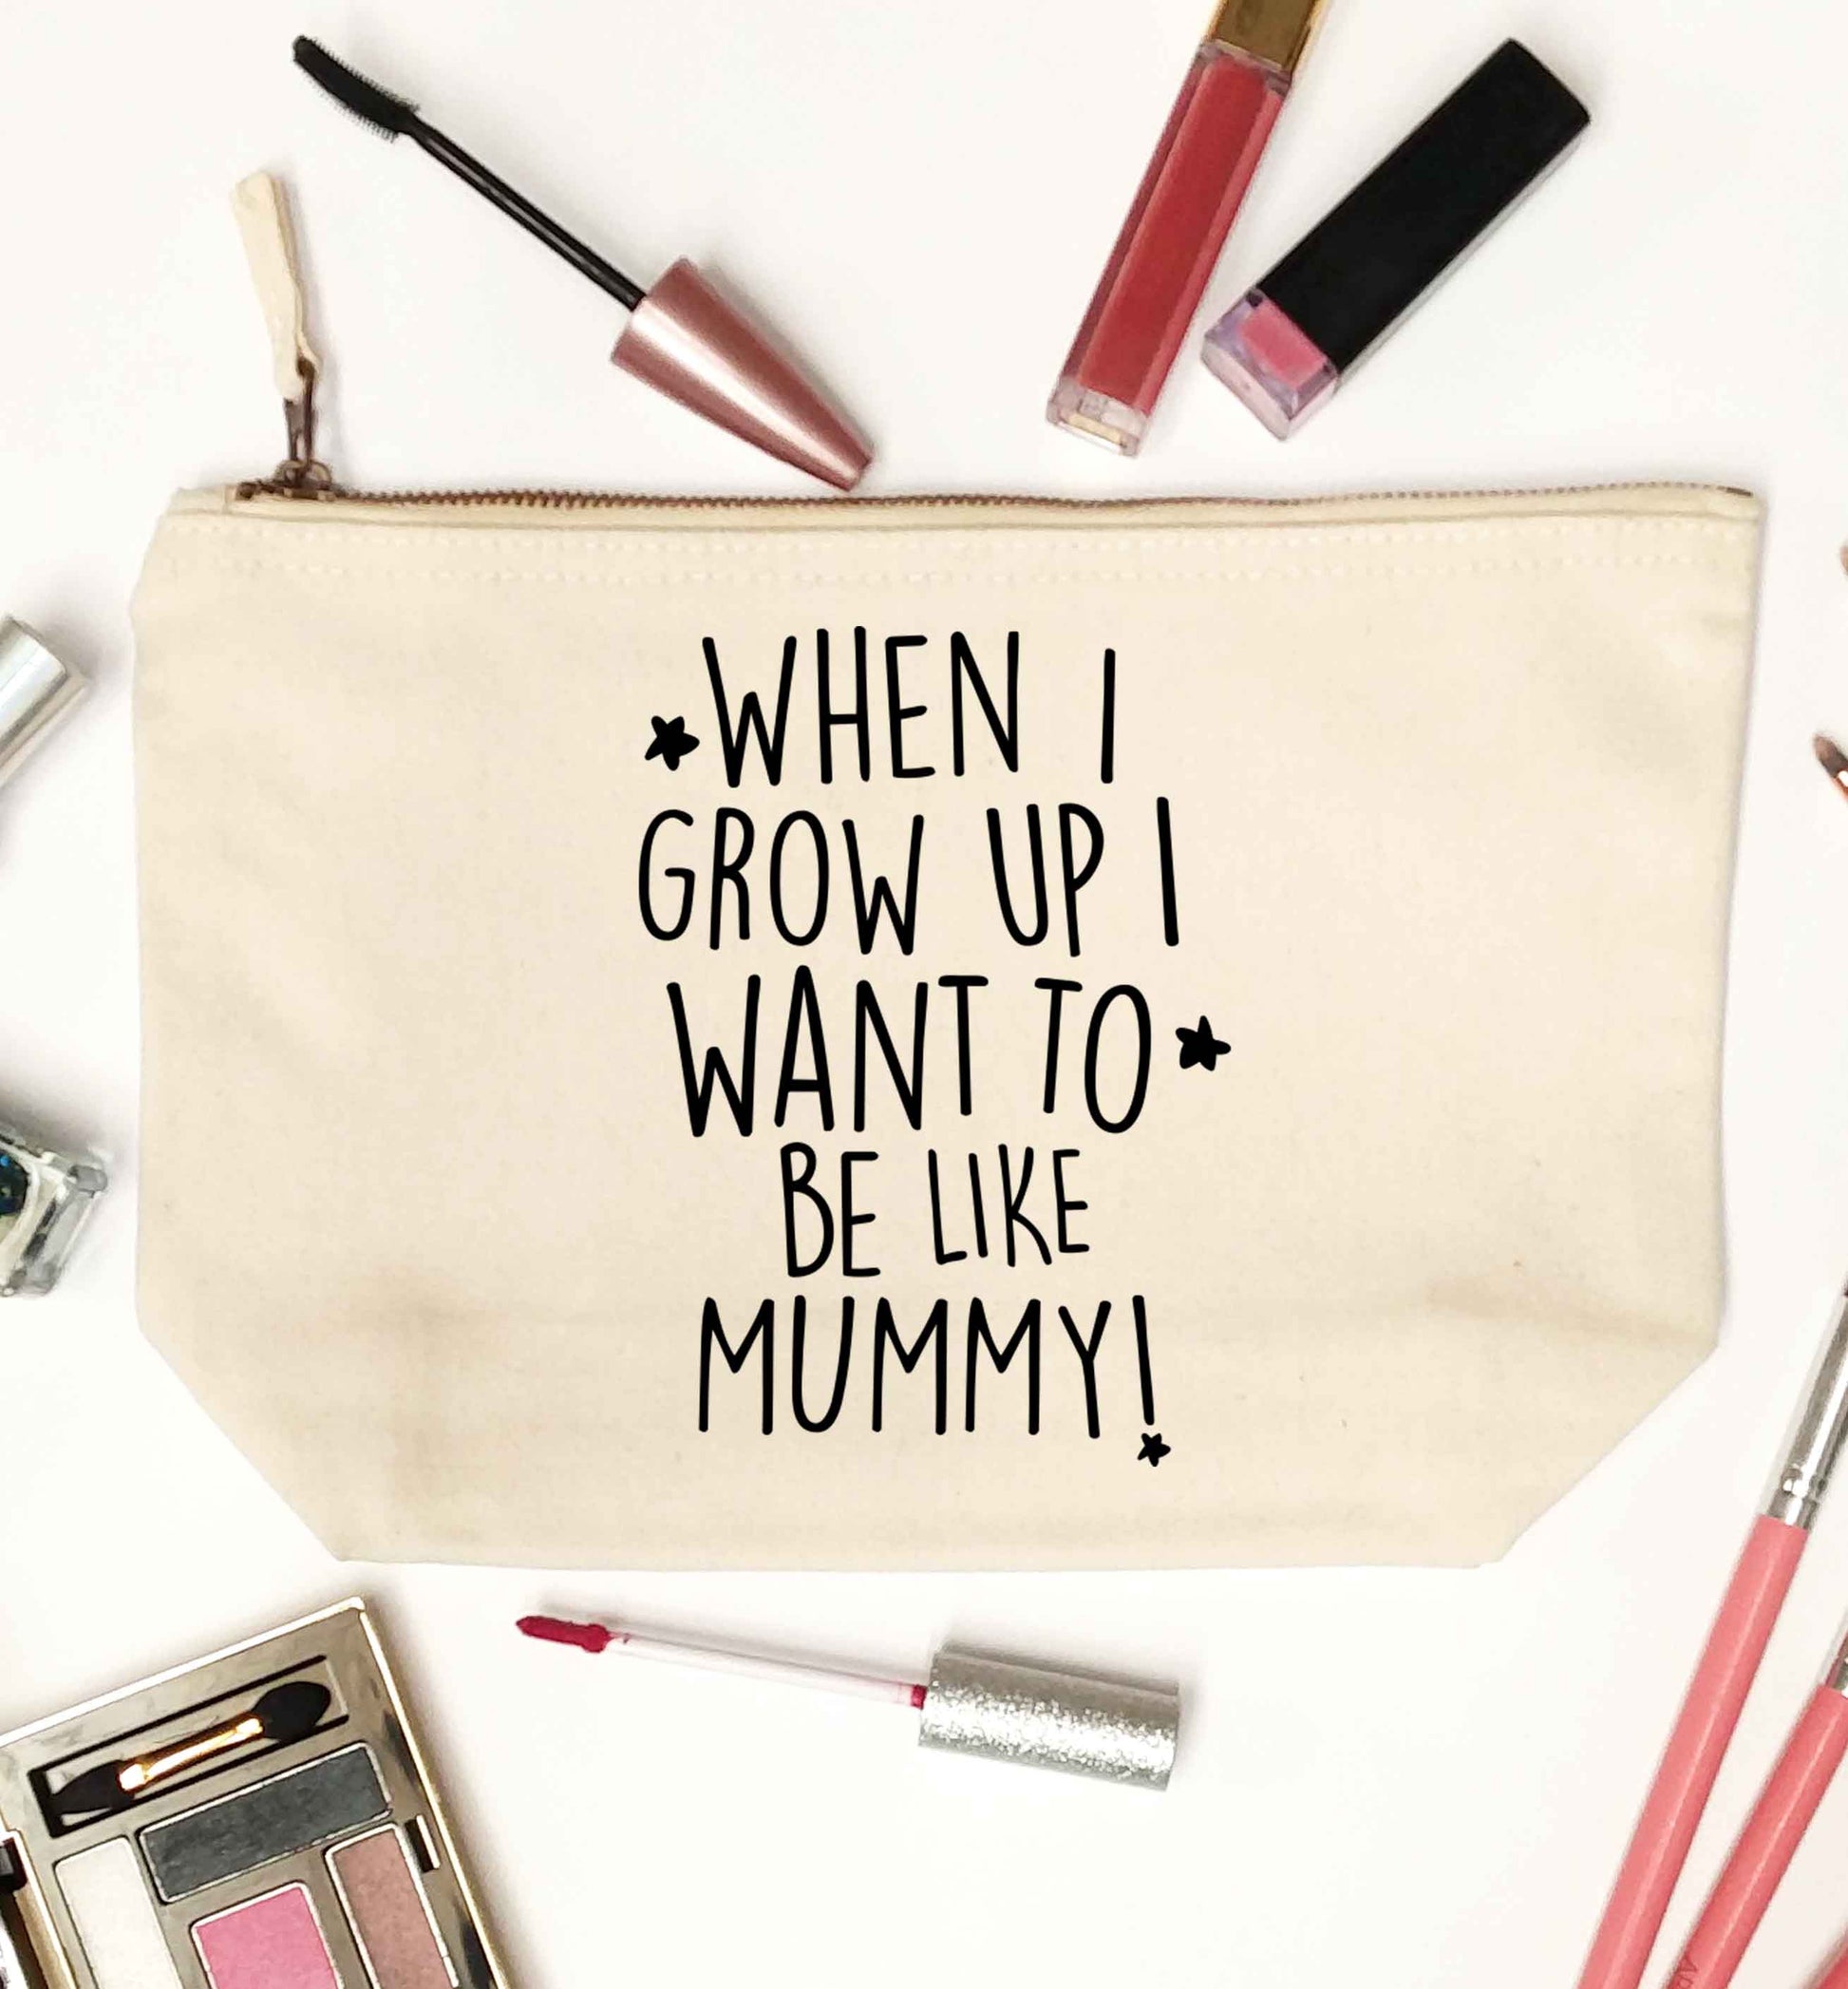 When I grow up I want to be like my mummy natural makeup bag